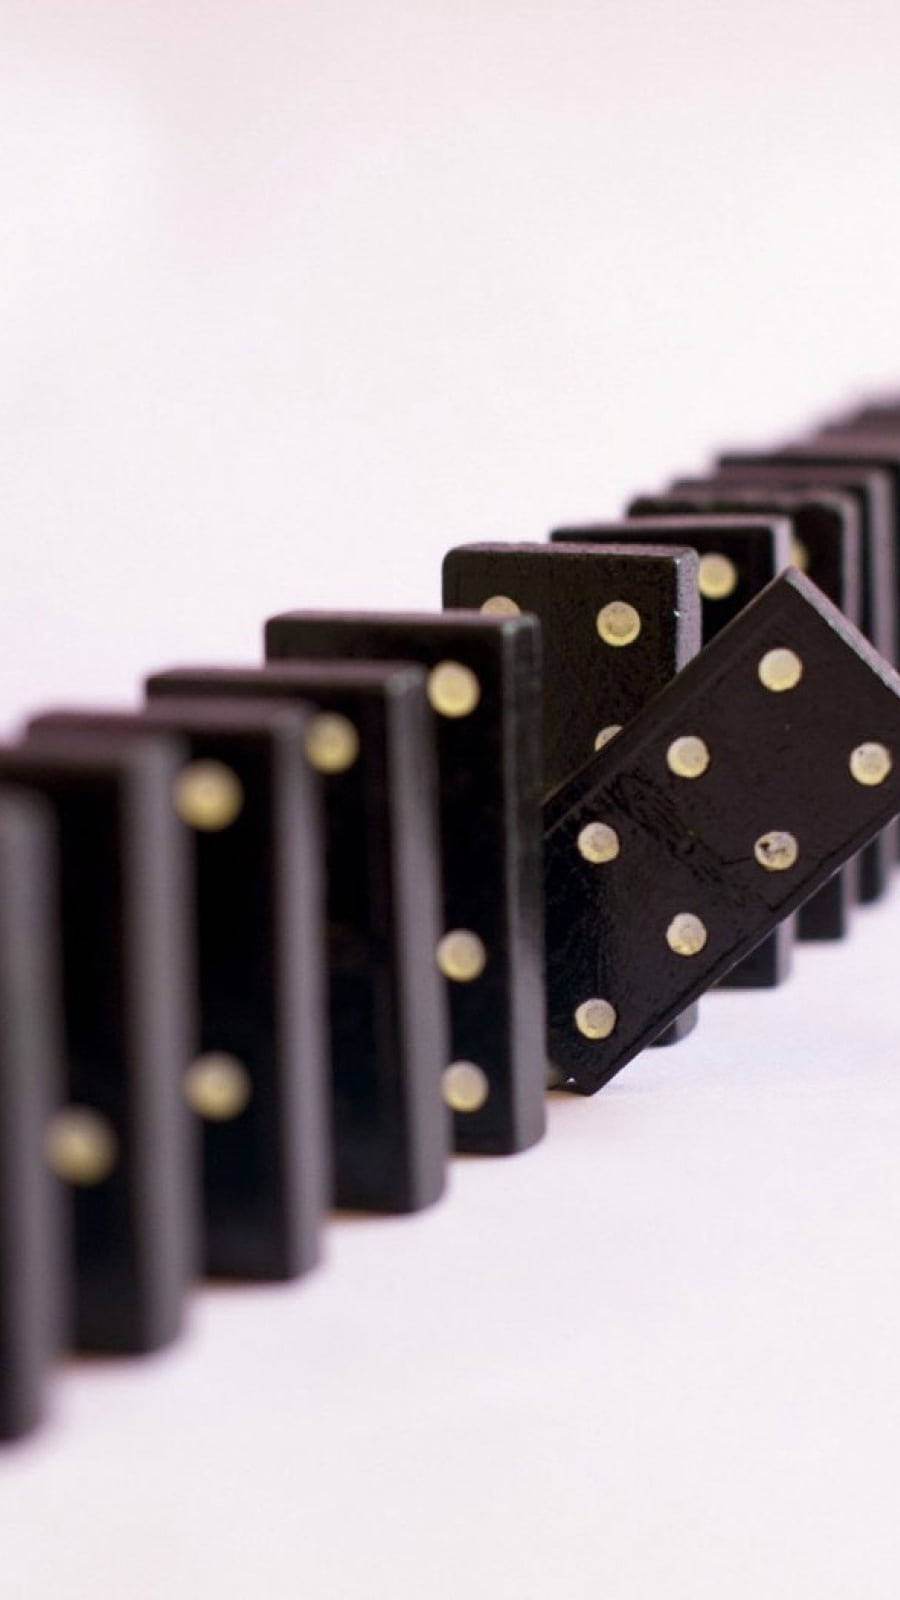 Line Of Dominos Ready For Action Background